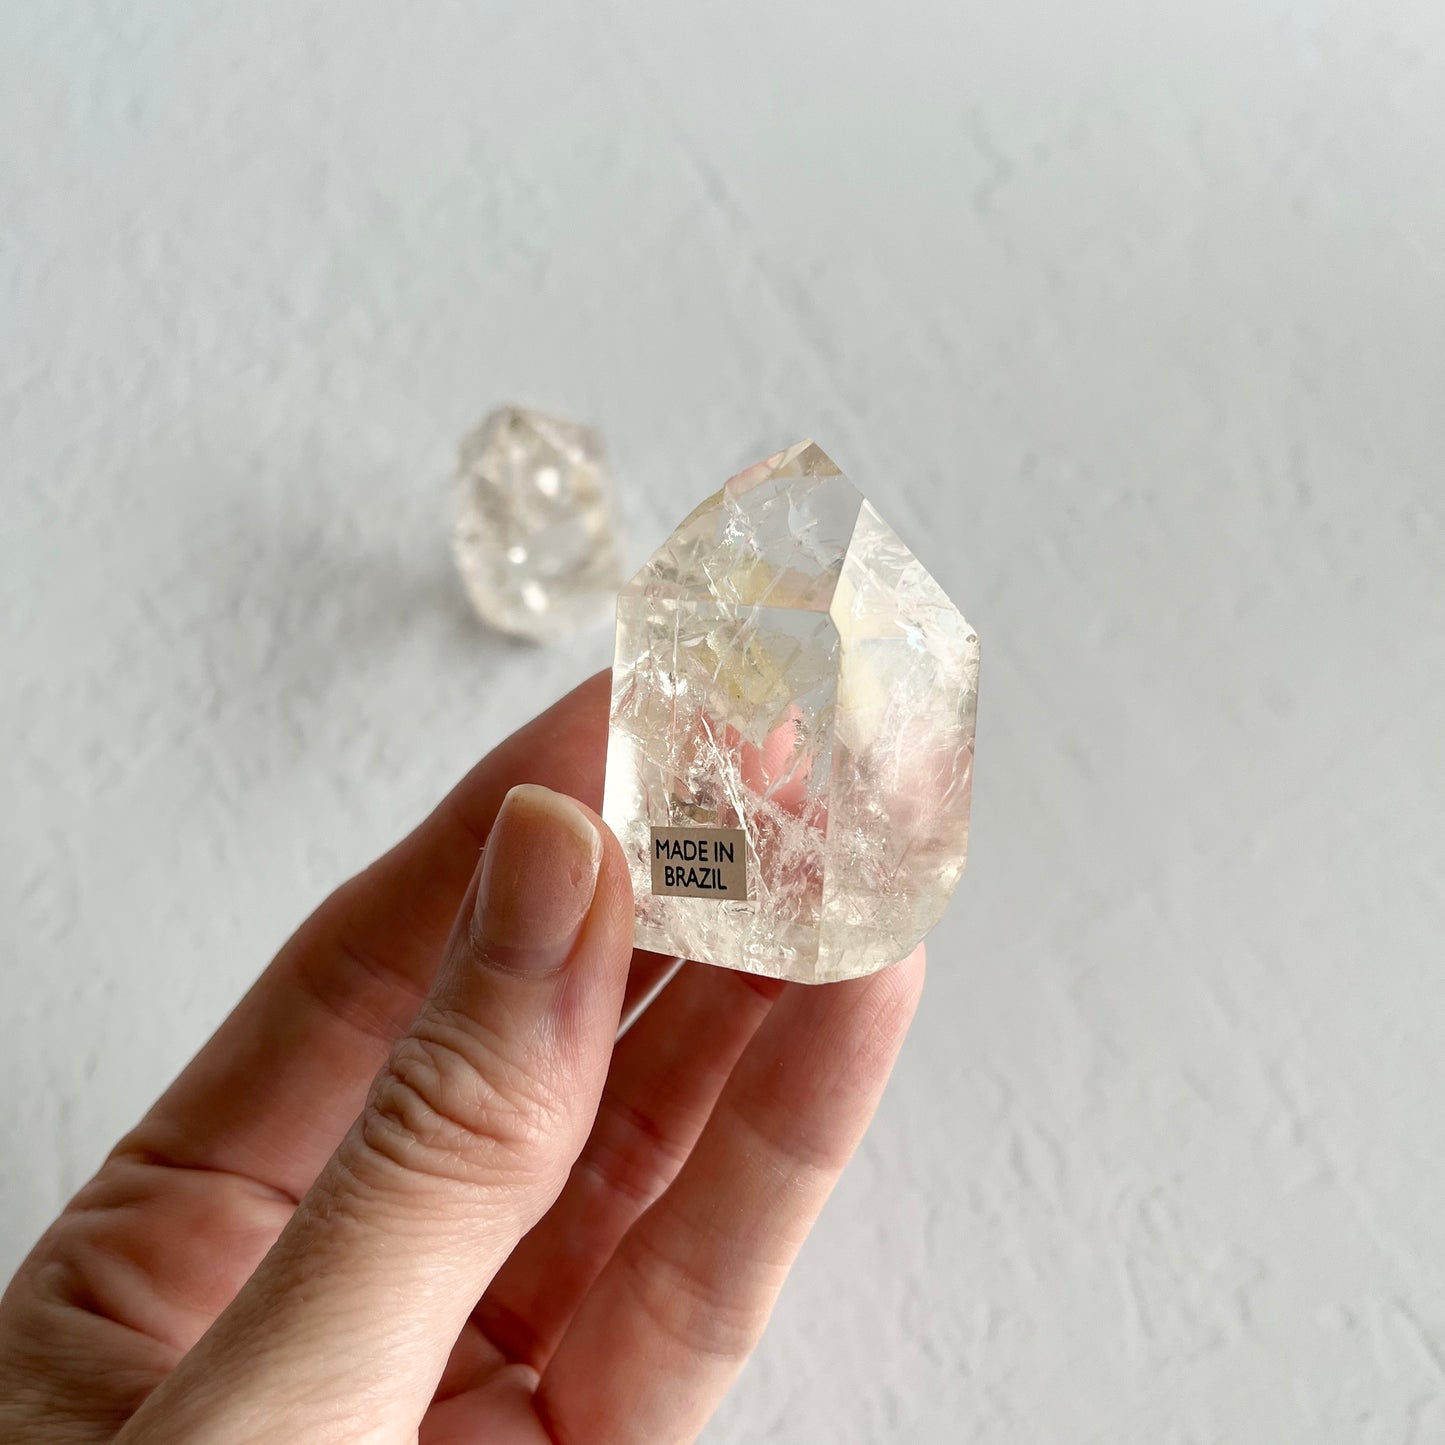 Clear Quartz Point with Calcite inclusion / 60g